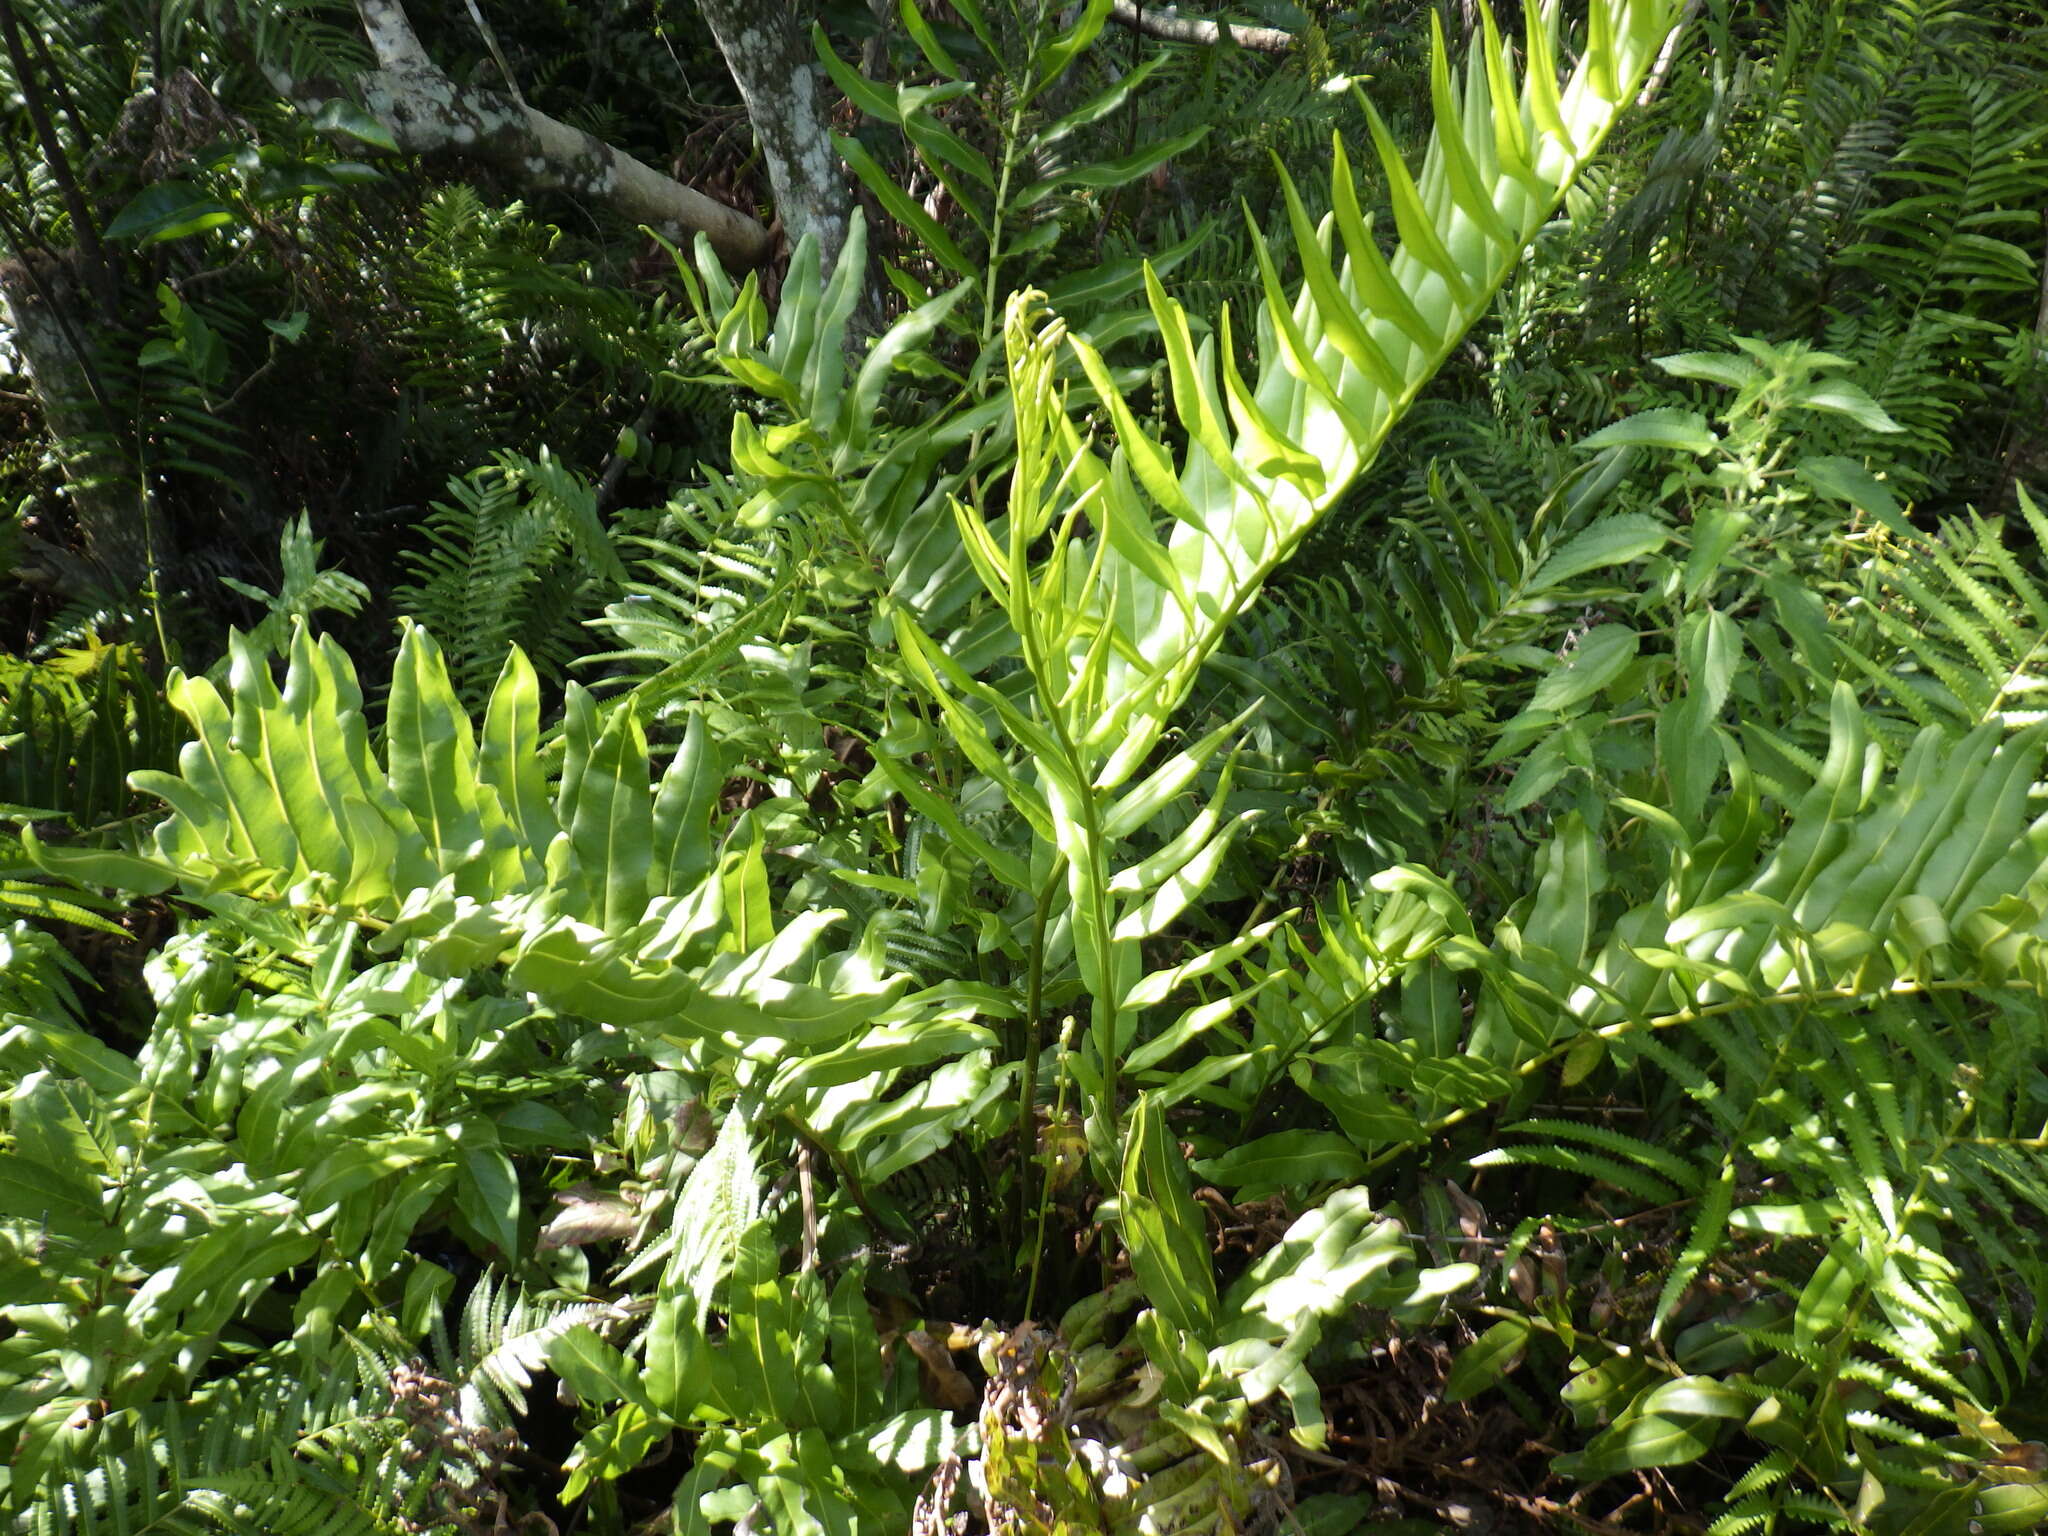 Image of giant leather fern